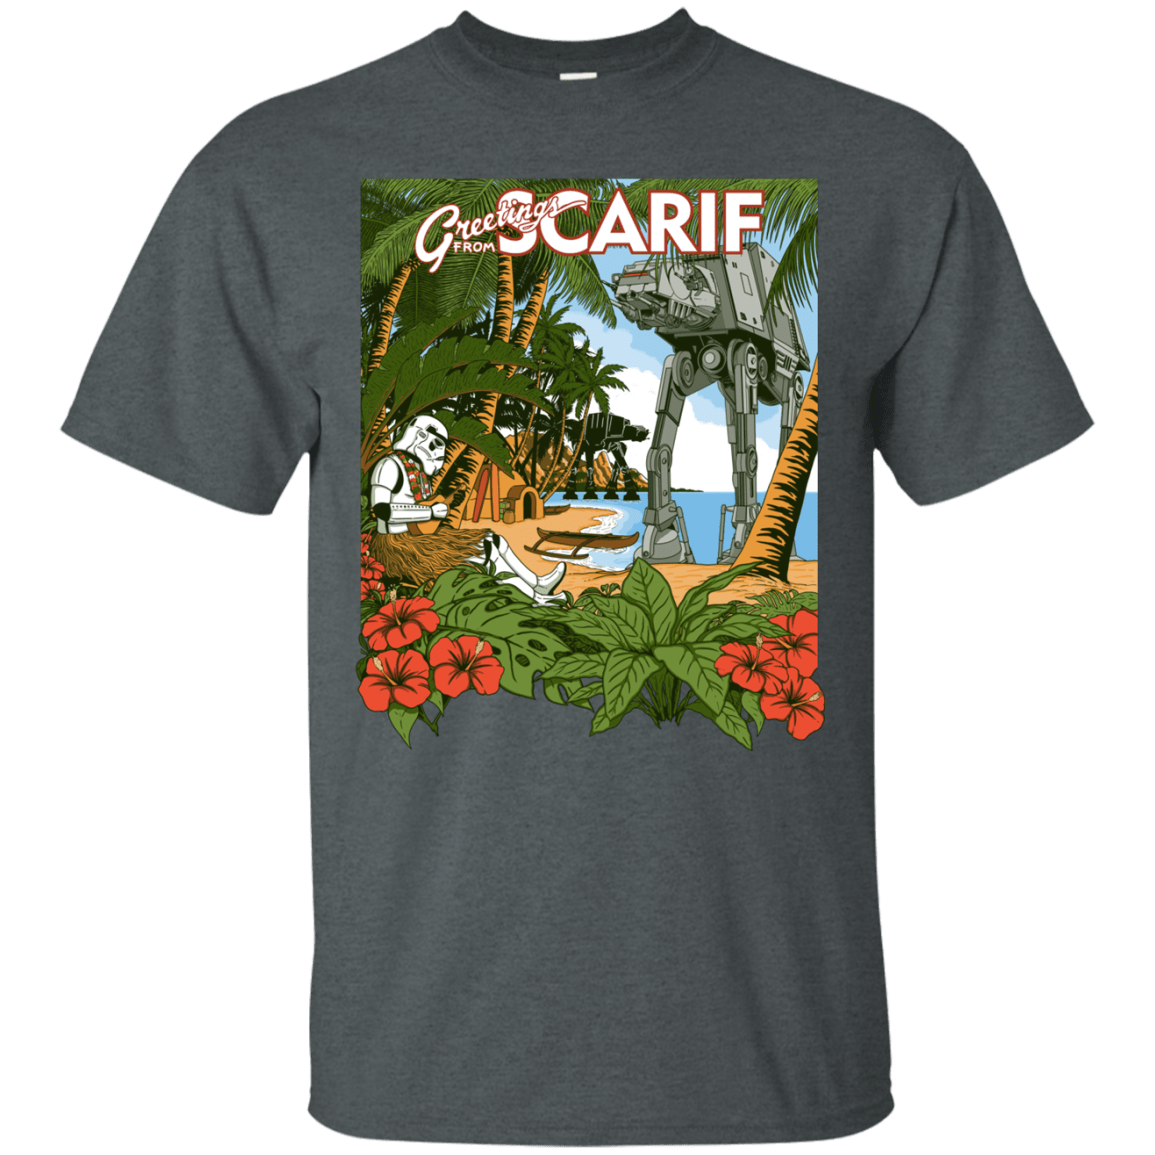 T-Shirts Dark Heather / S Greetings from Scarif T-Shirt